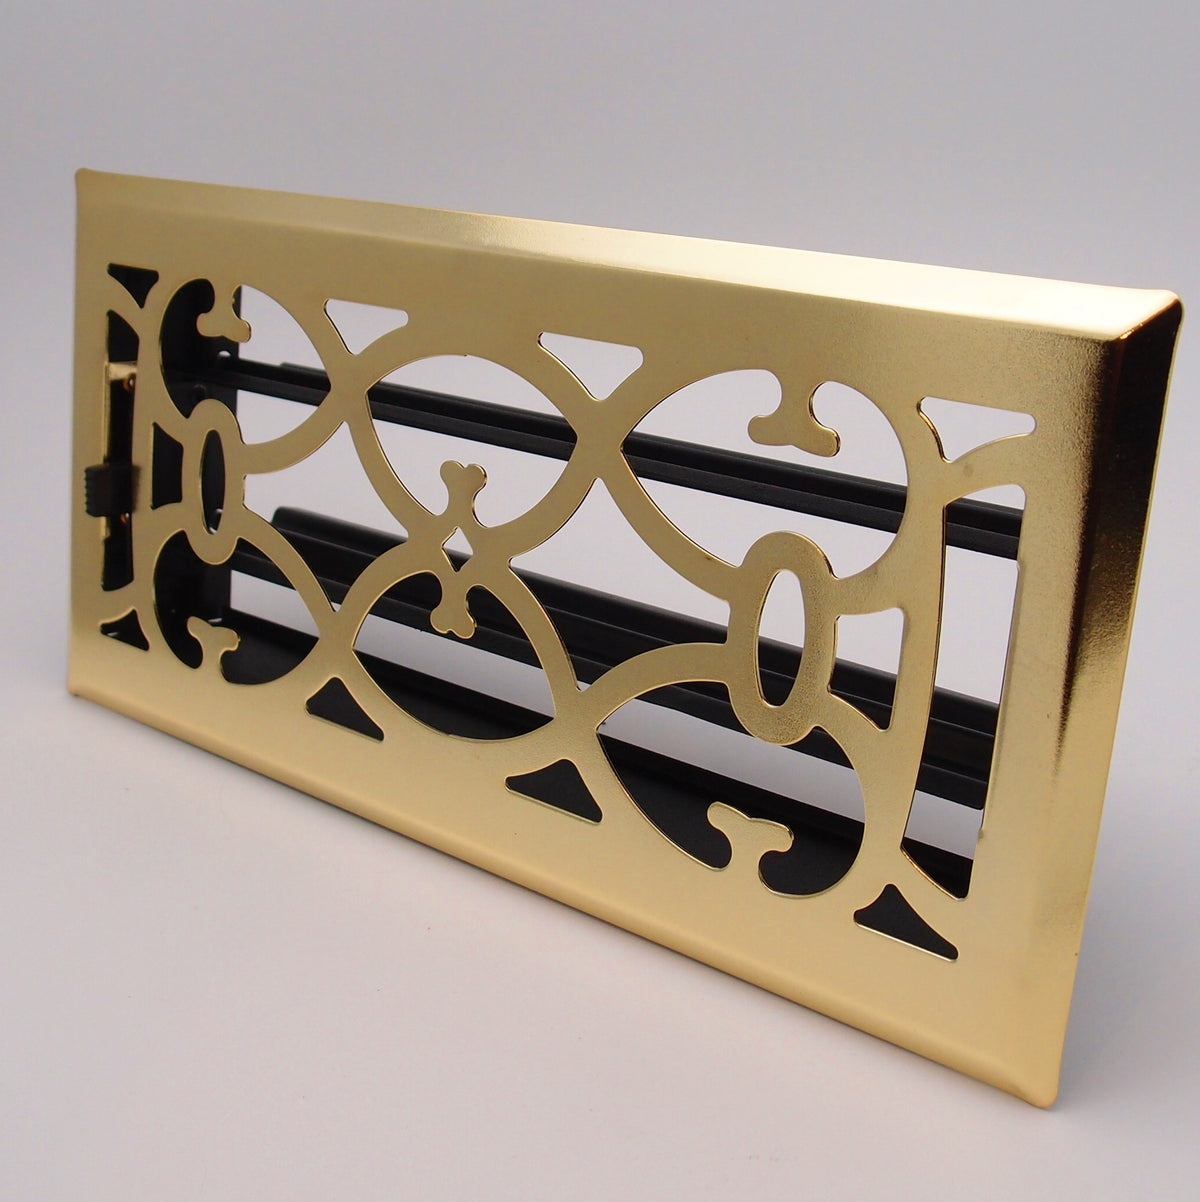 4&quot; X 14&quot; Brass Victorian Floor Register Grille - Modern Contempo Decorative Grate - HVAC Vent Duct Cover - Brass Plated